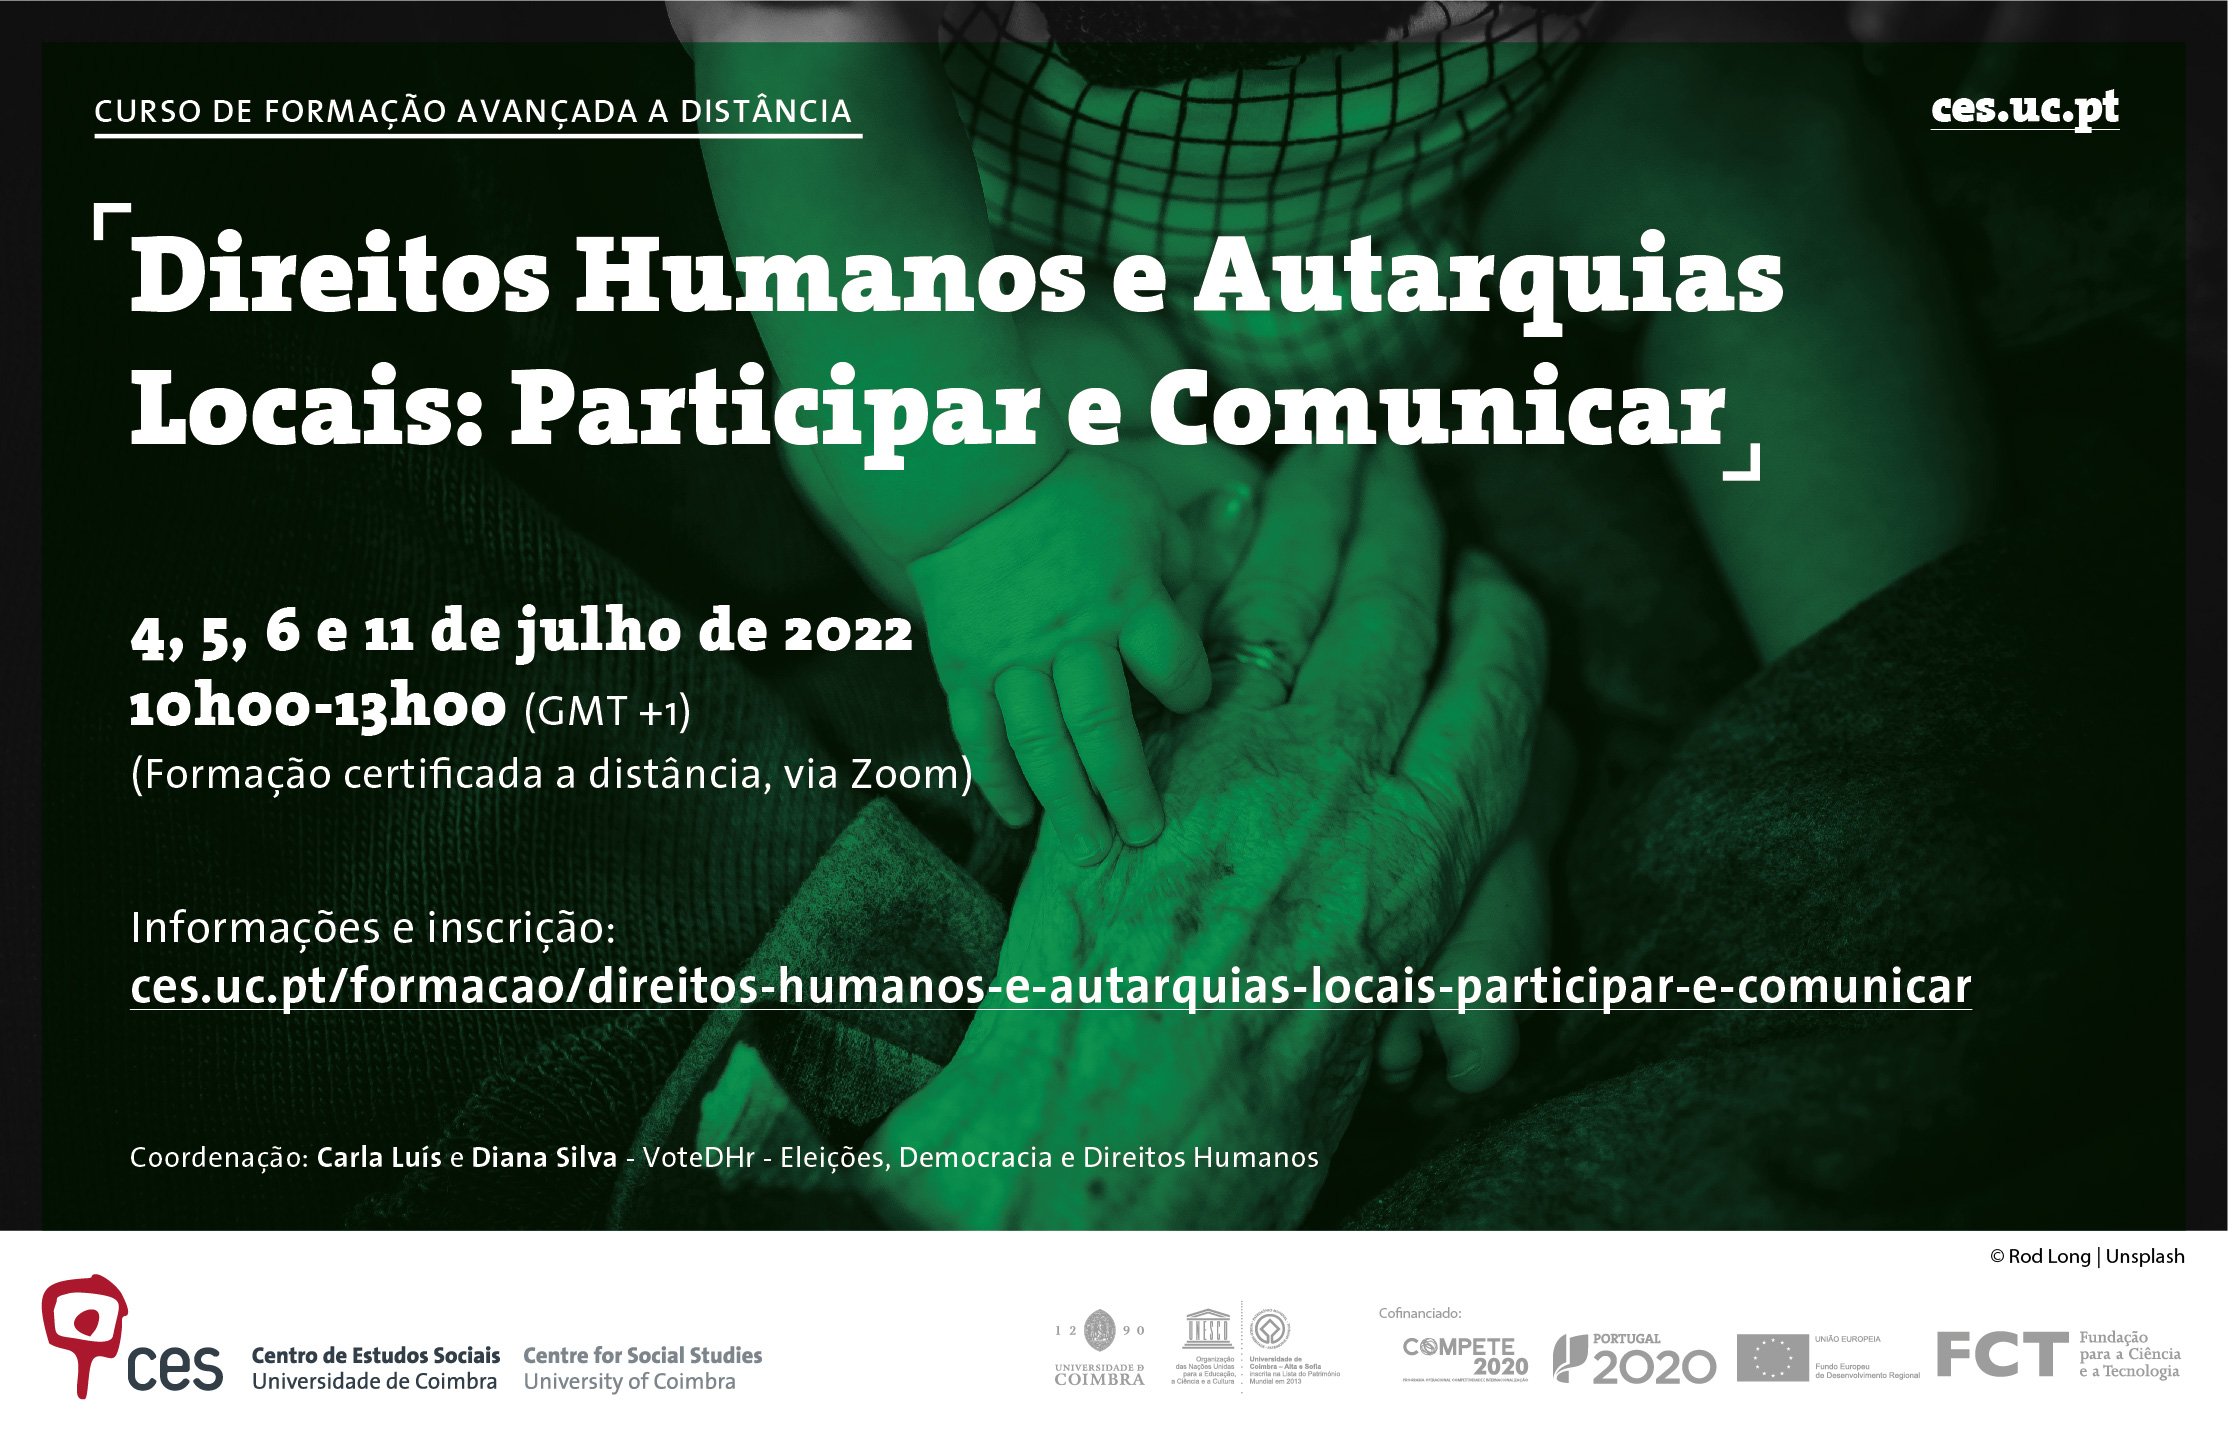 Human Rights and Local Governments: Participating and Communicating<span id="edit_38916"><script>$(function() { $('#edit_38916').load( "/myces/user/editobj.php?tipo=evento&id=38916" ); });</script></span>